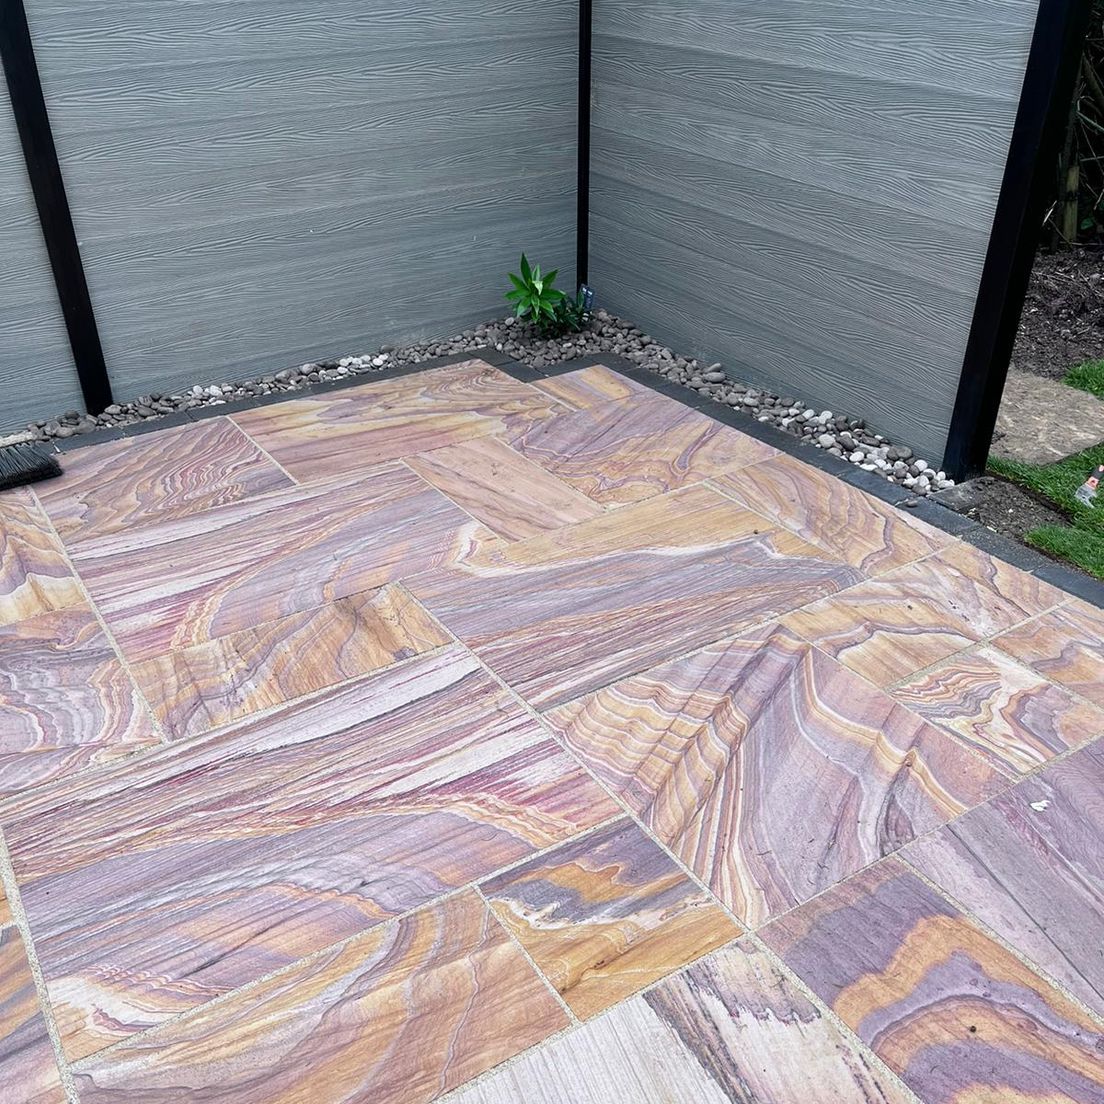 Marbled paving stones